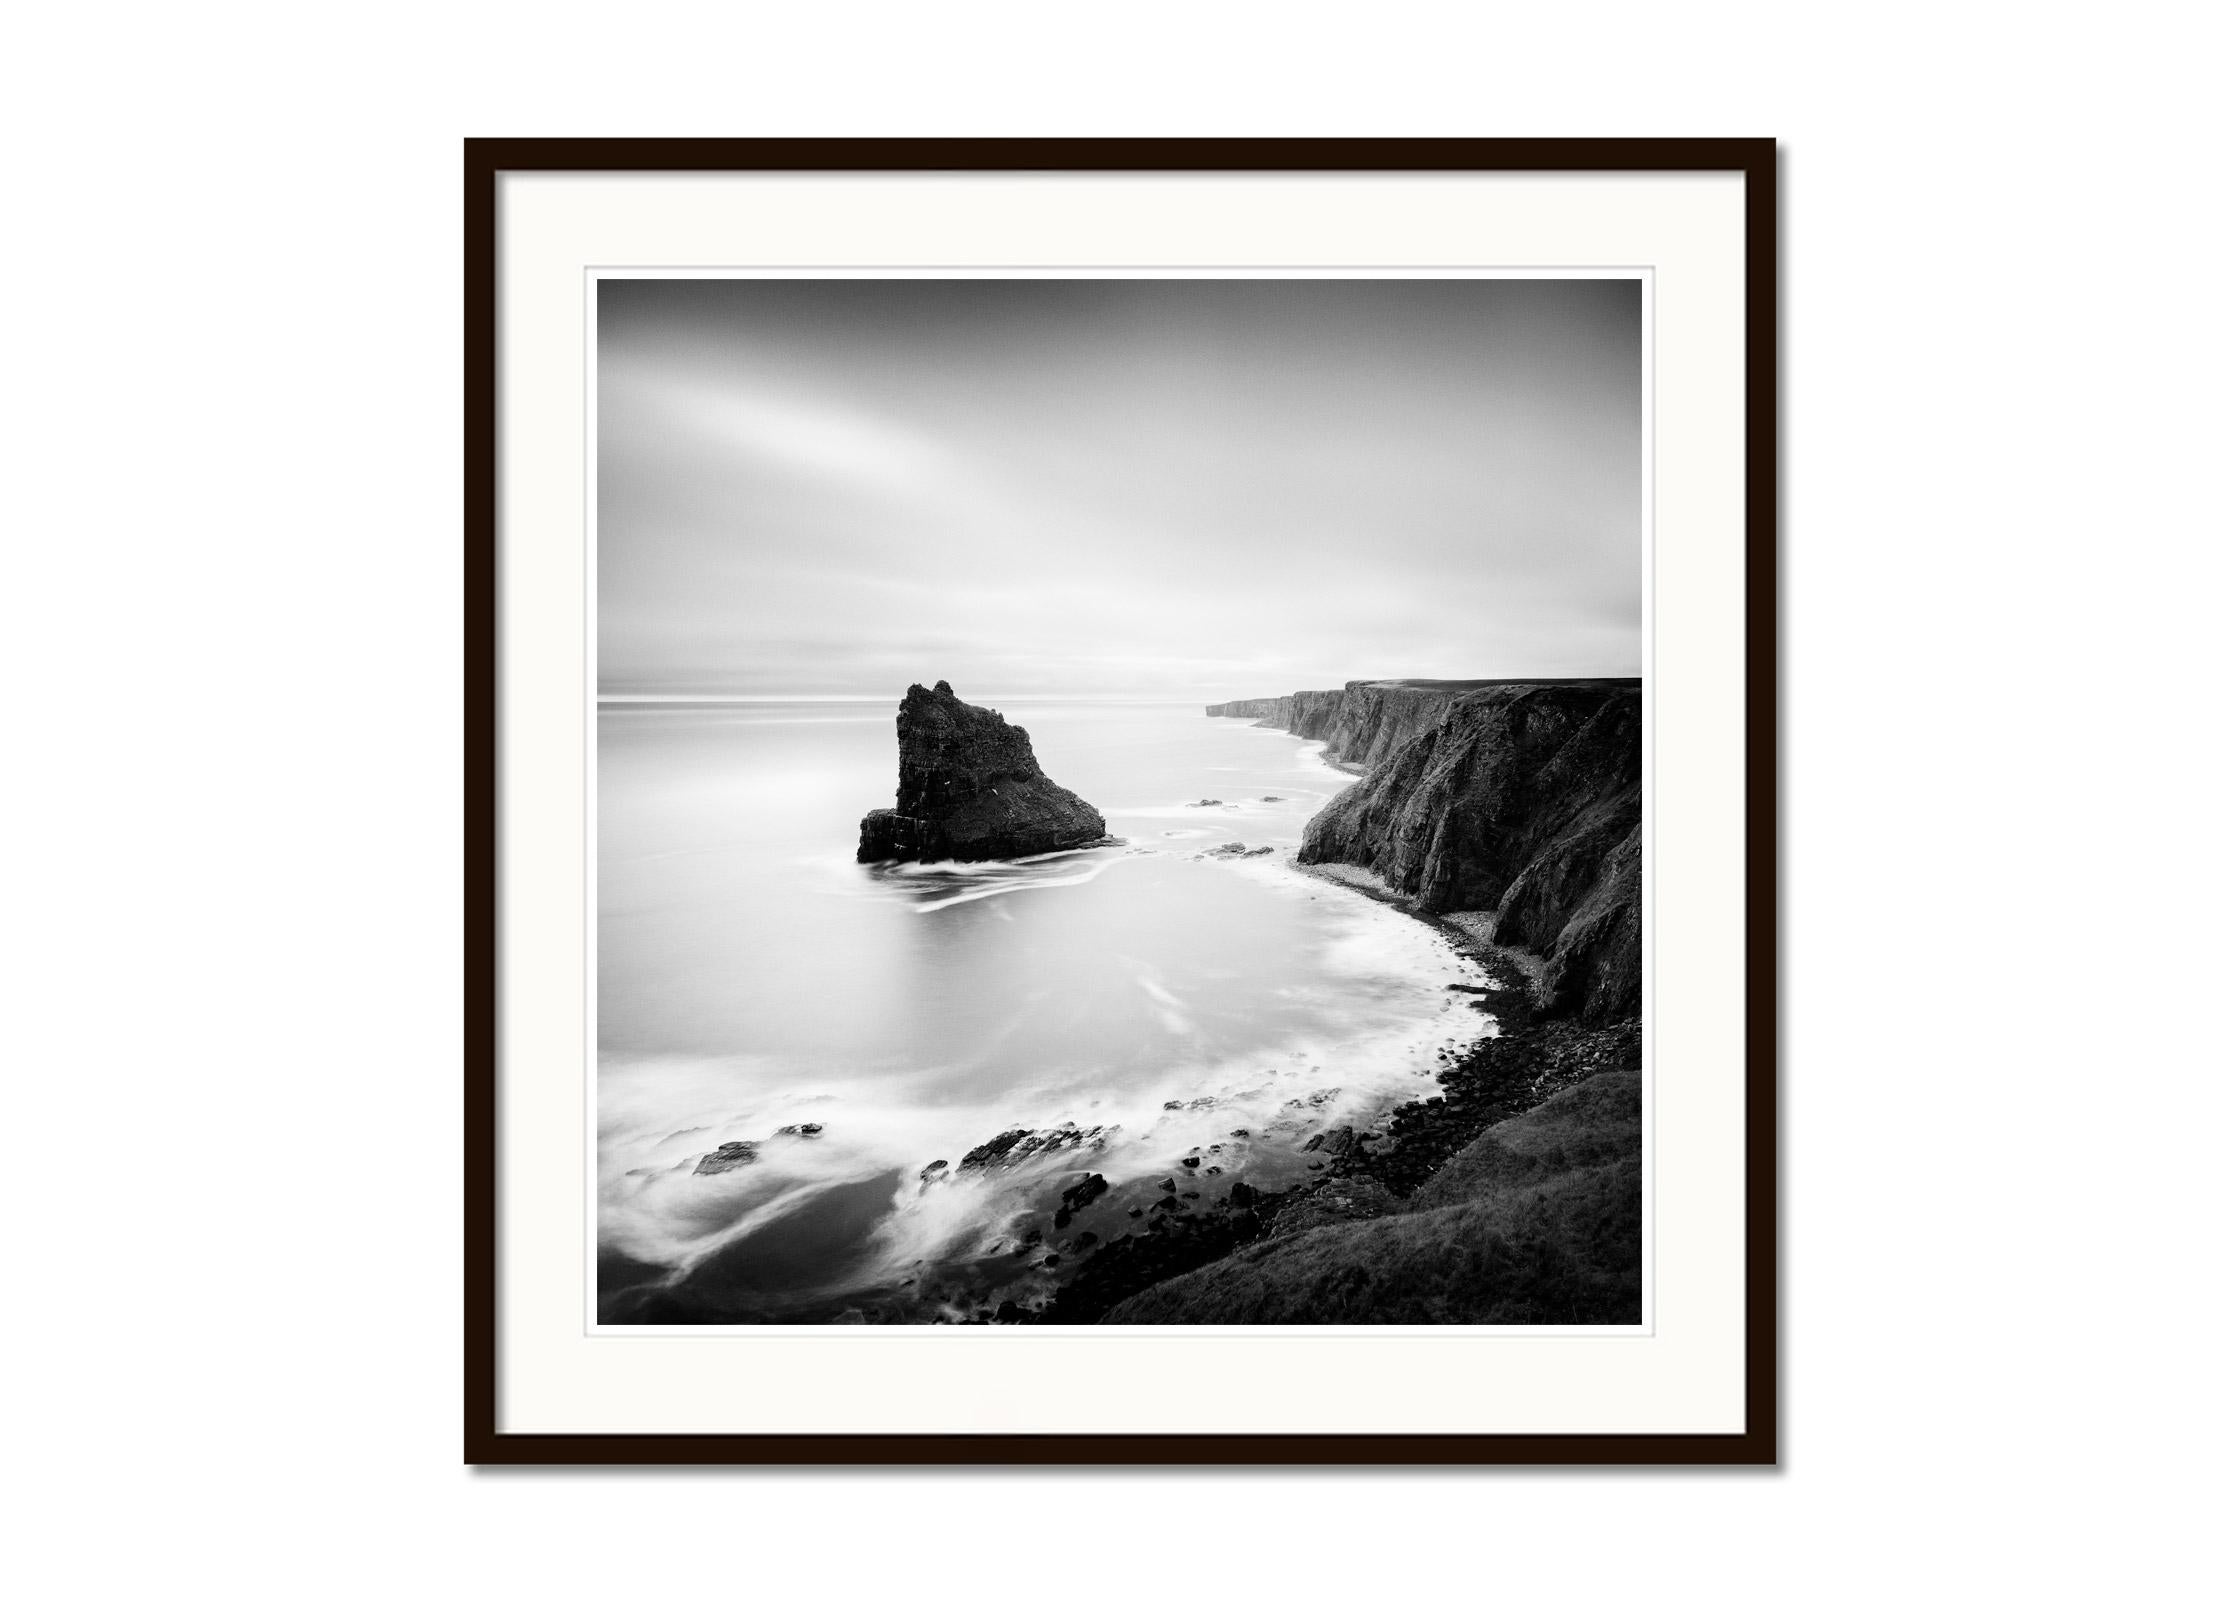 Surreal Moment, scottish coastline cliff, black and white photography, landscape - Gray Black and White Photograph by Gerald Berghammer